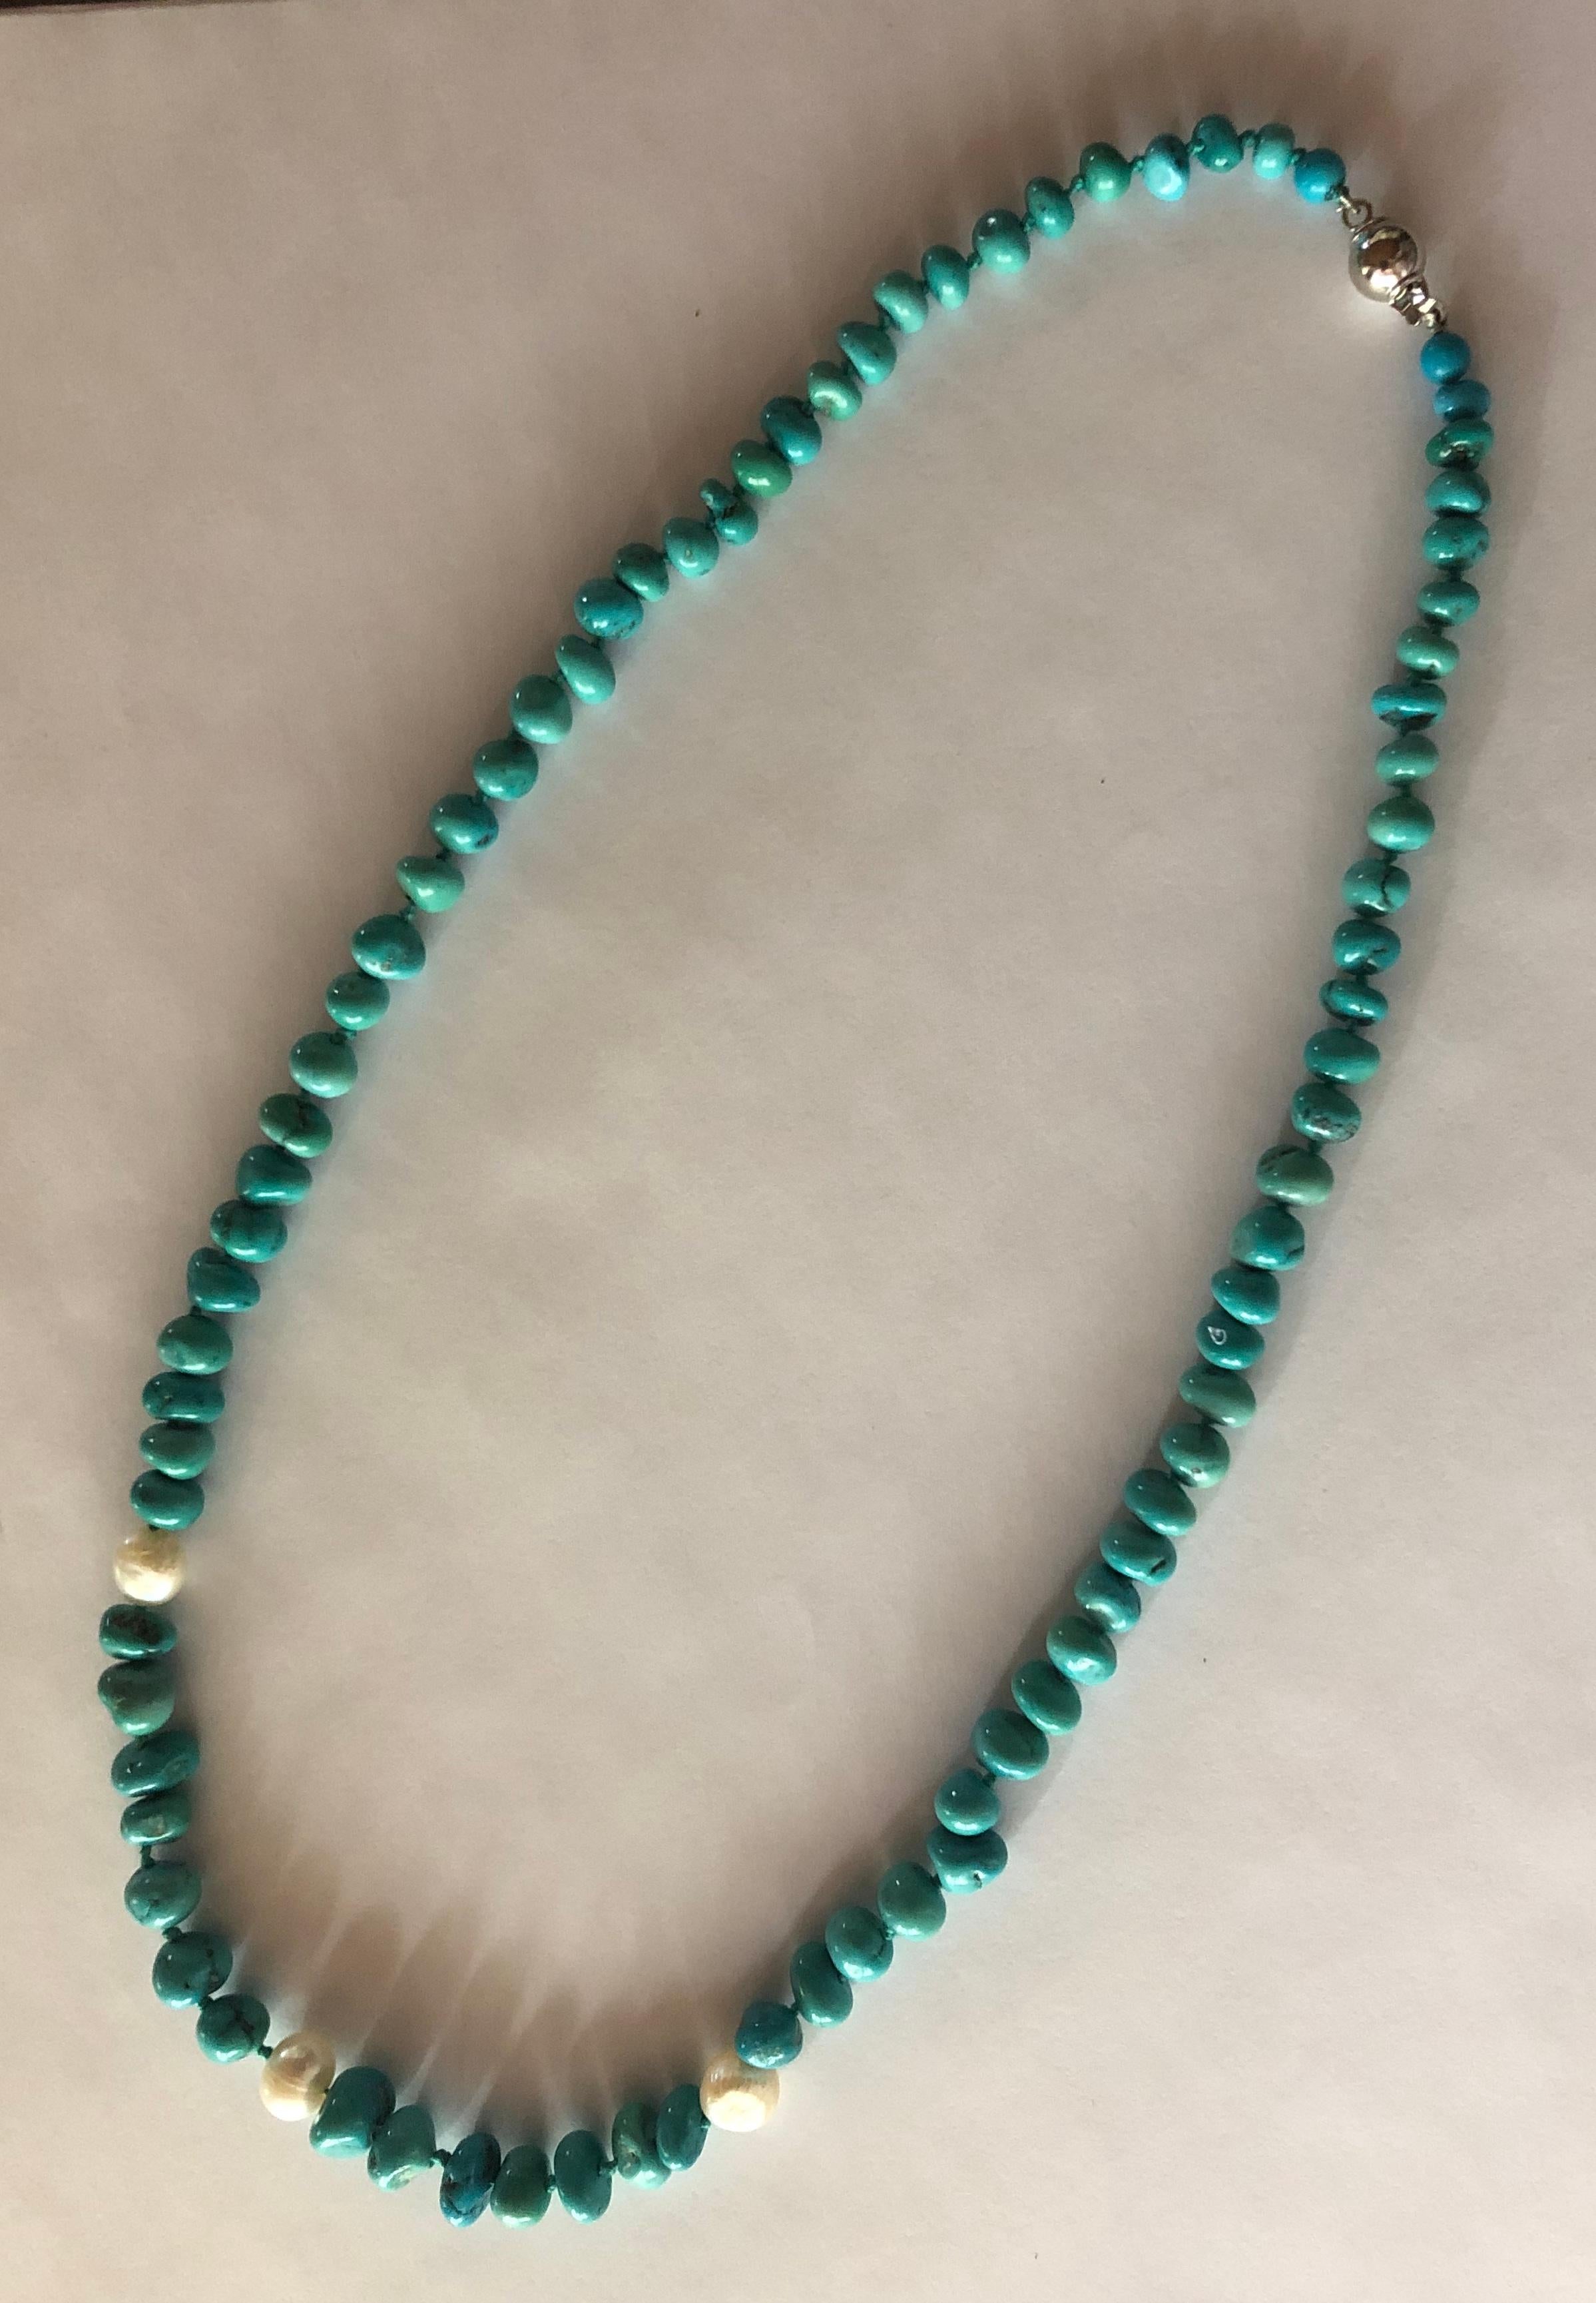 Turquoise nuggets necklace with sweet water pearls and 18Kt white gold clasp. 80 turquoise nuggets of different dimensions, and matching turquoise color. 3 Pearls. Made in Italy. 750 stamp.

Please do hot hesitate to ask for further information or